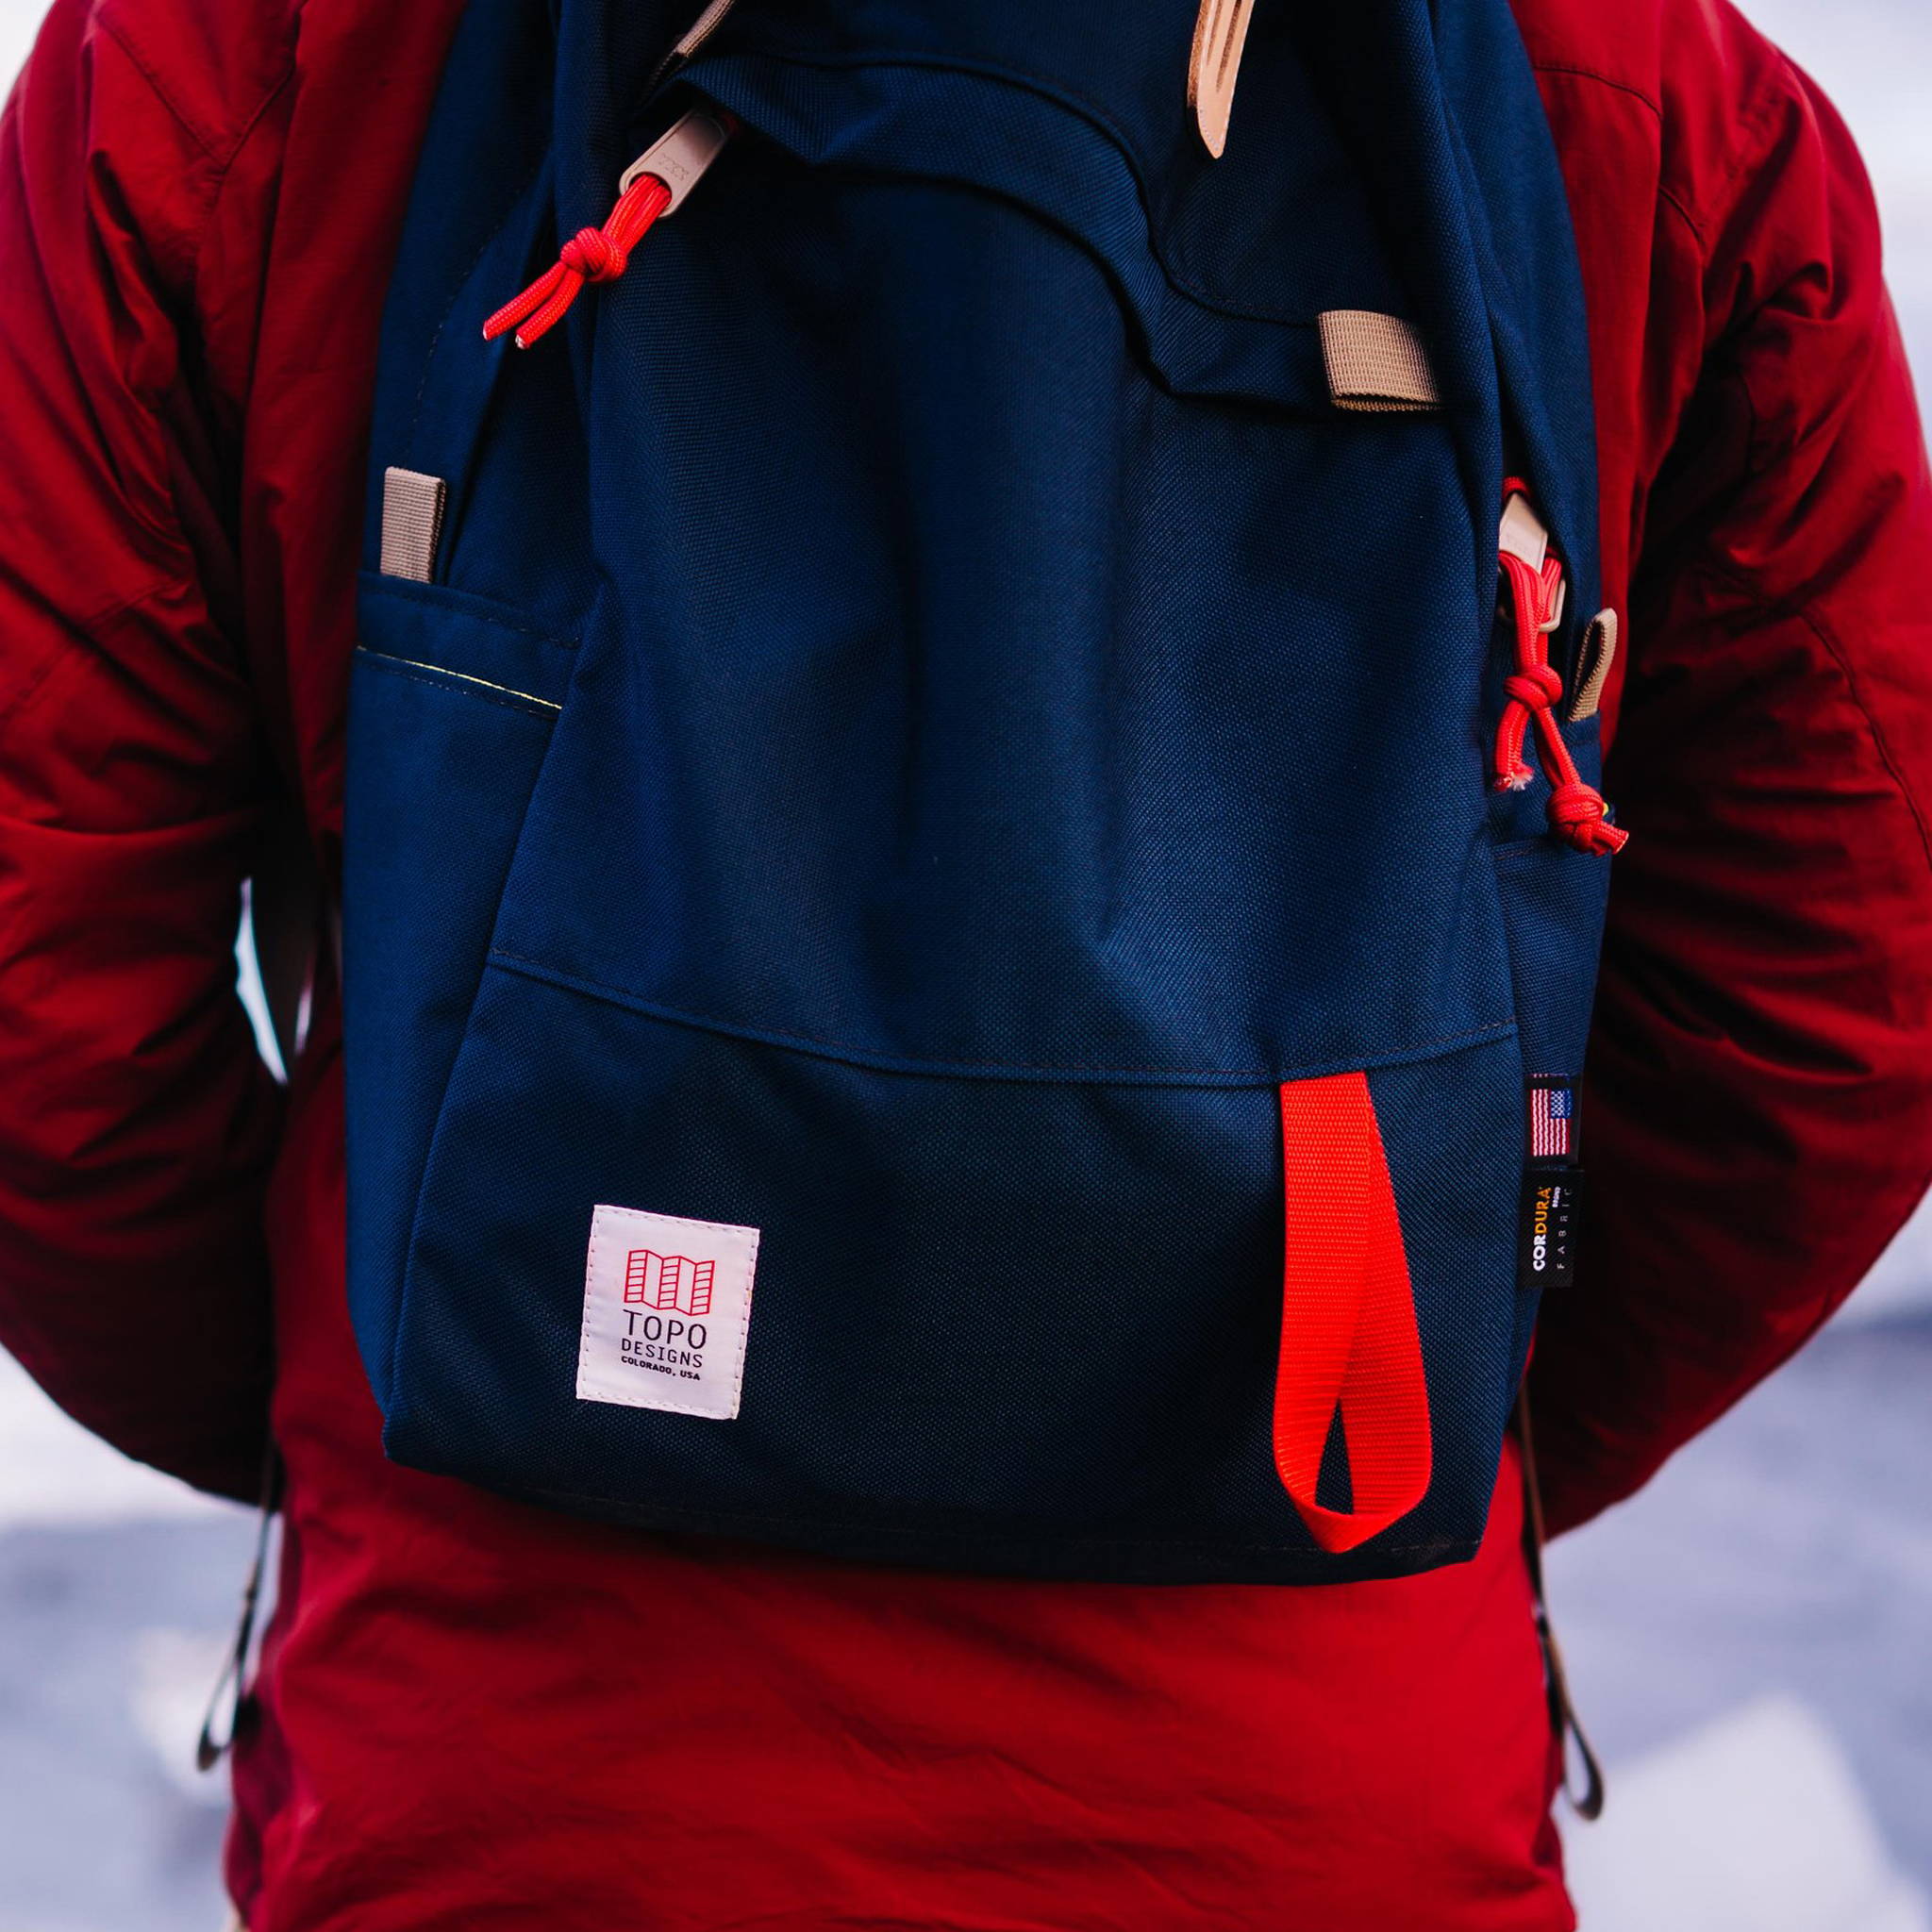 Daypack | Topo Designs - Backpacks Made in Colorado, USA